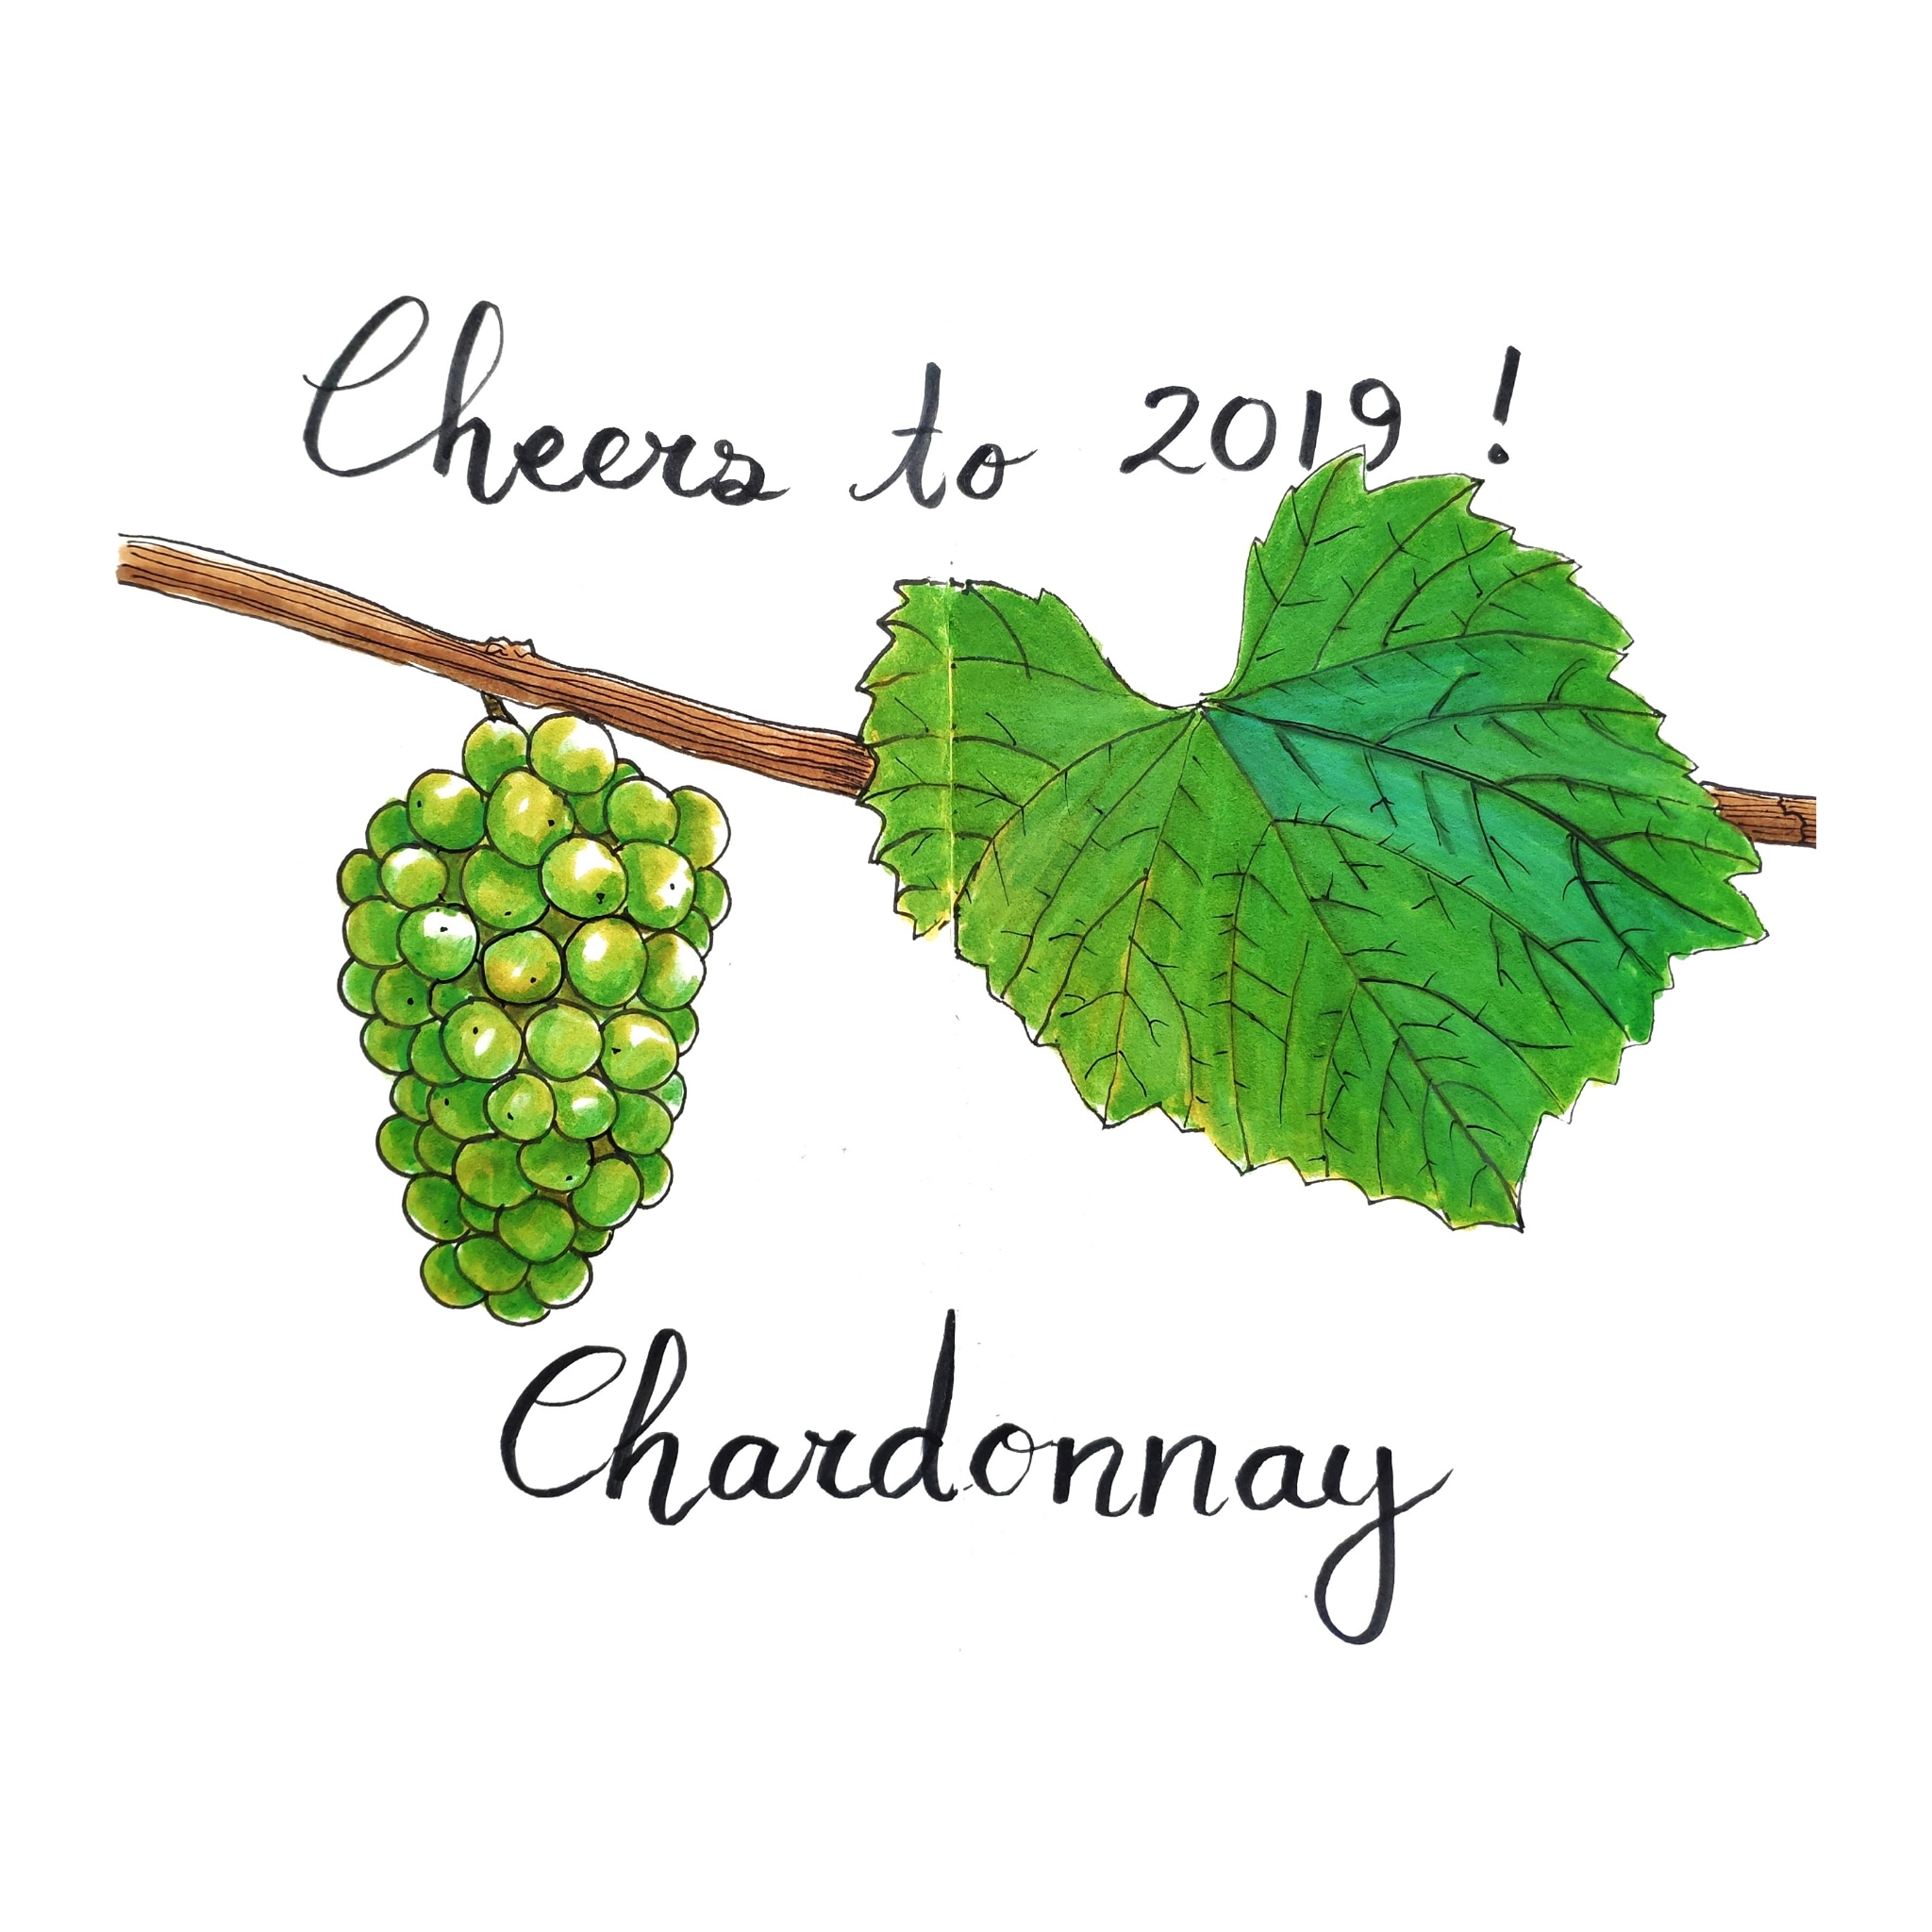 Cheers to 2019! May it be a good vintage.